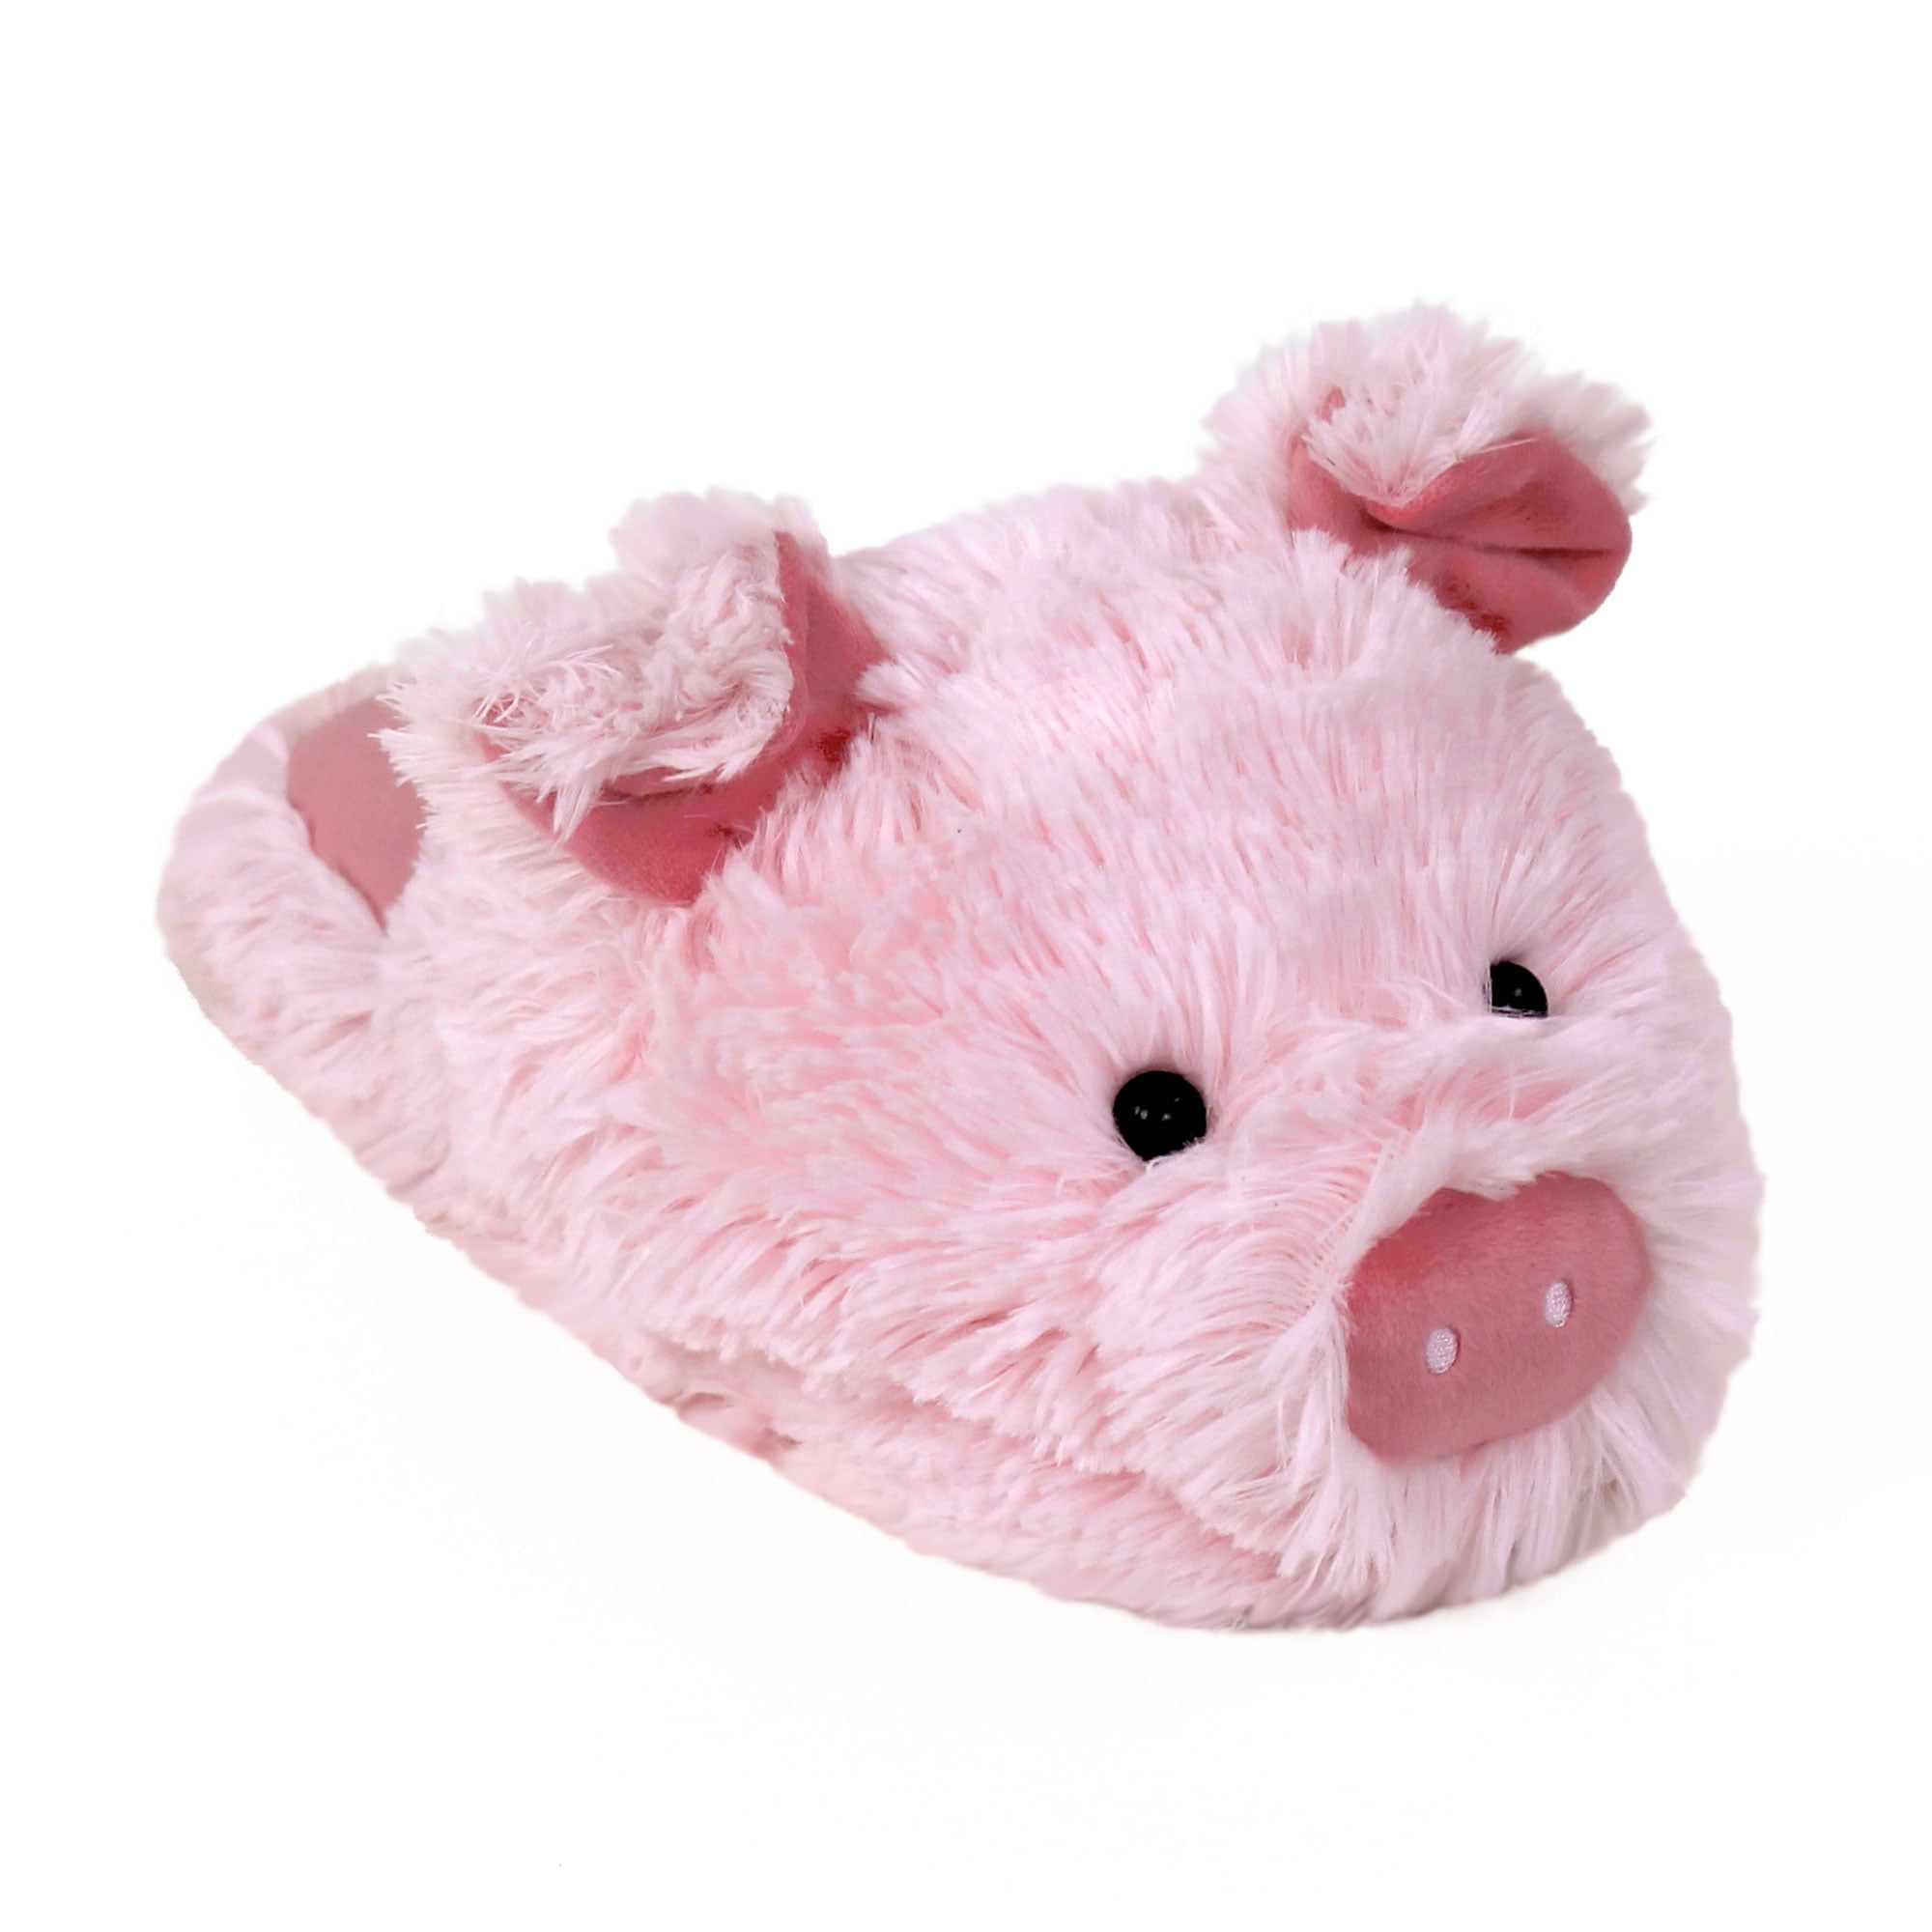 fuzzy pig slippers